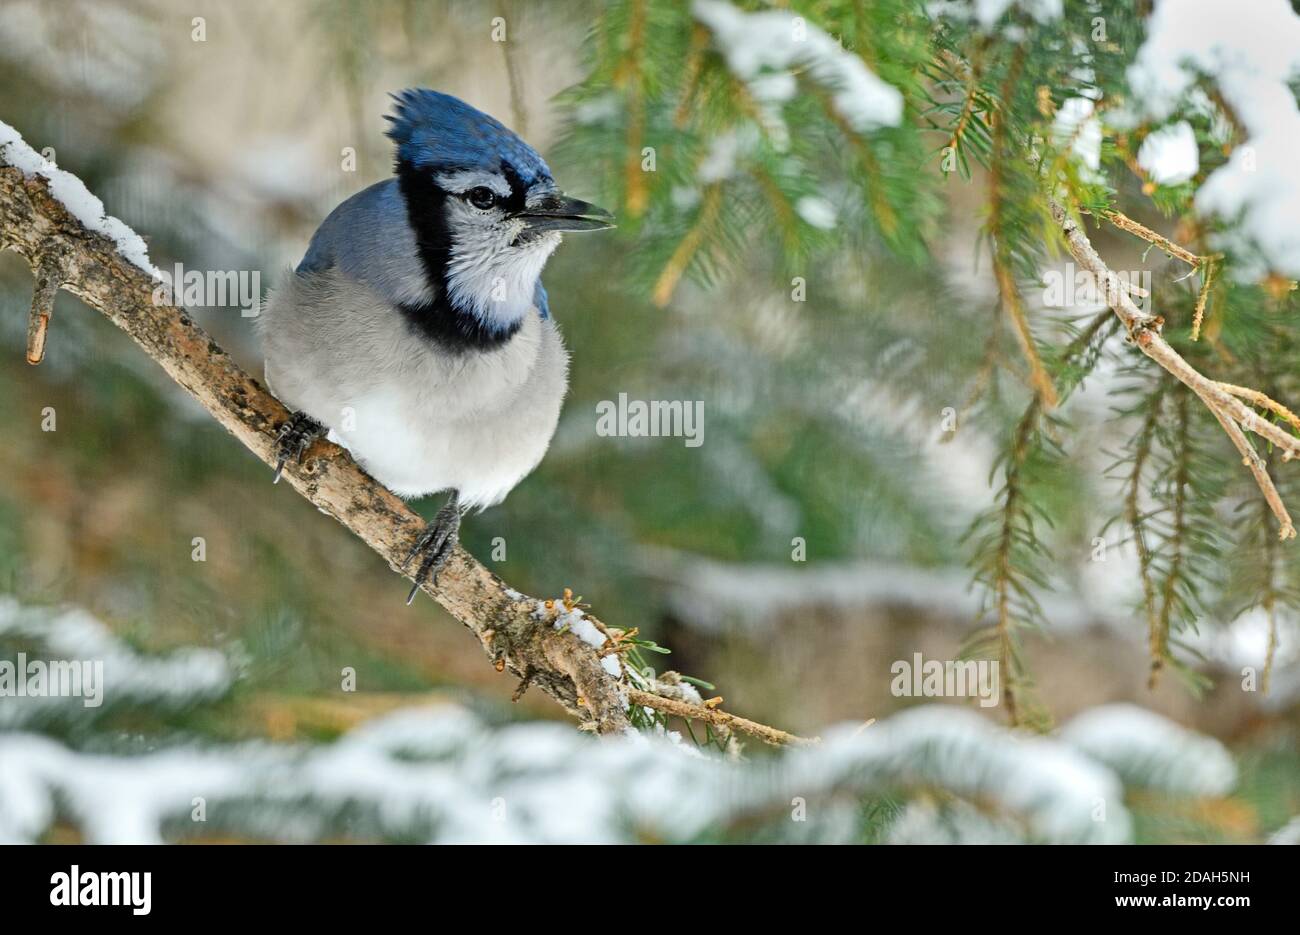 An eastern Blue Jay,' Cyanocitta cristata', perched on a snow covered spruce tree branch in rural Alberta Canada Stock Photo